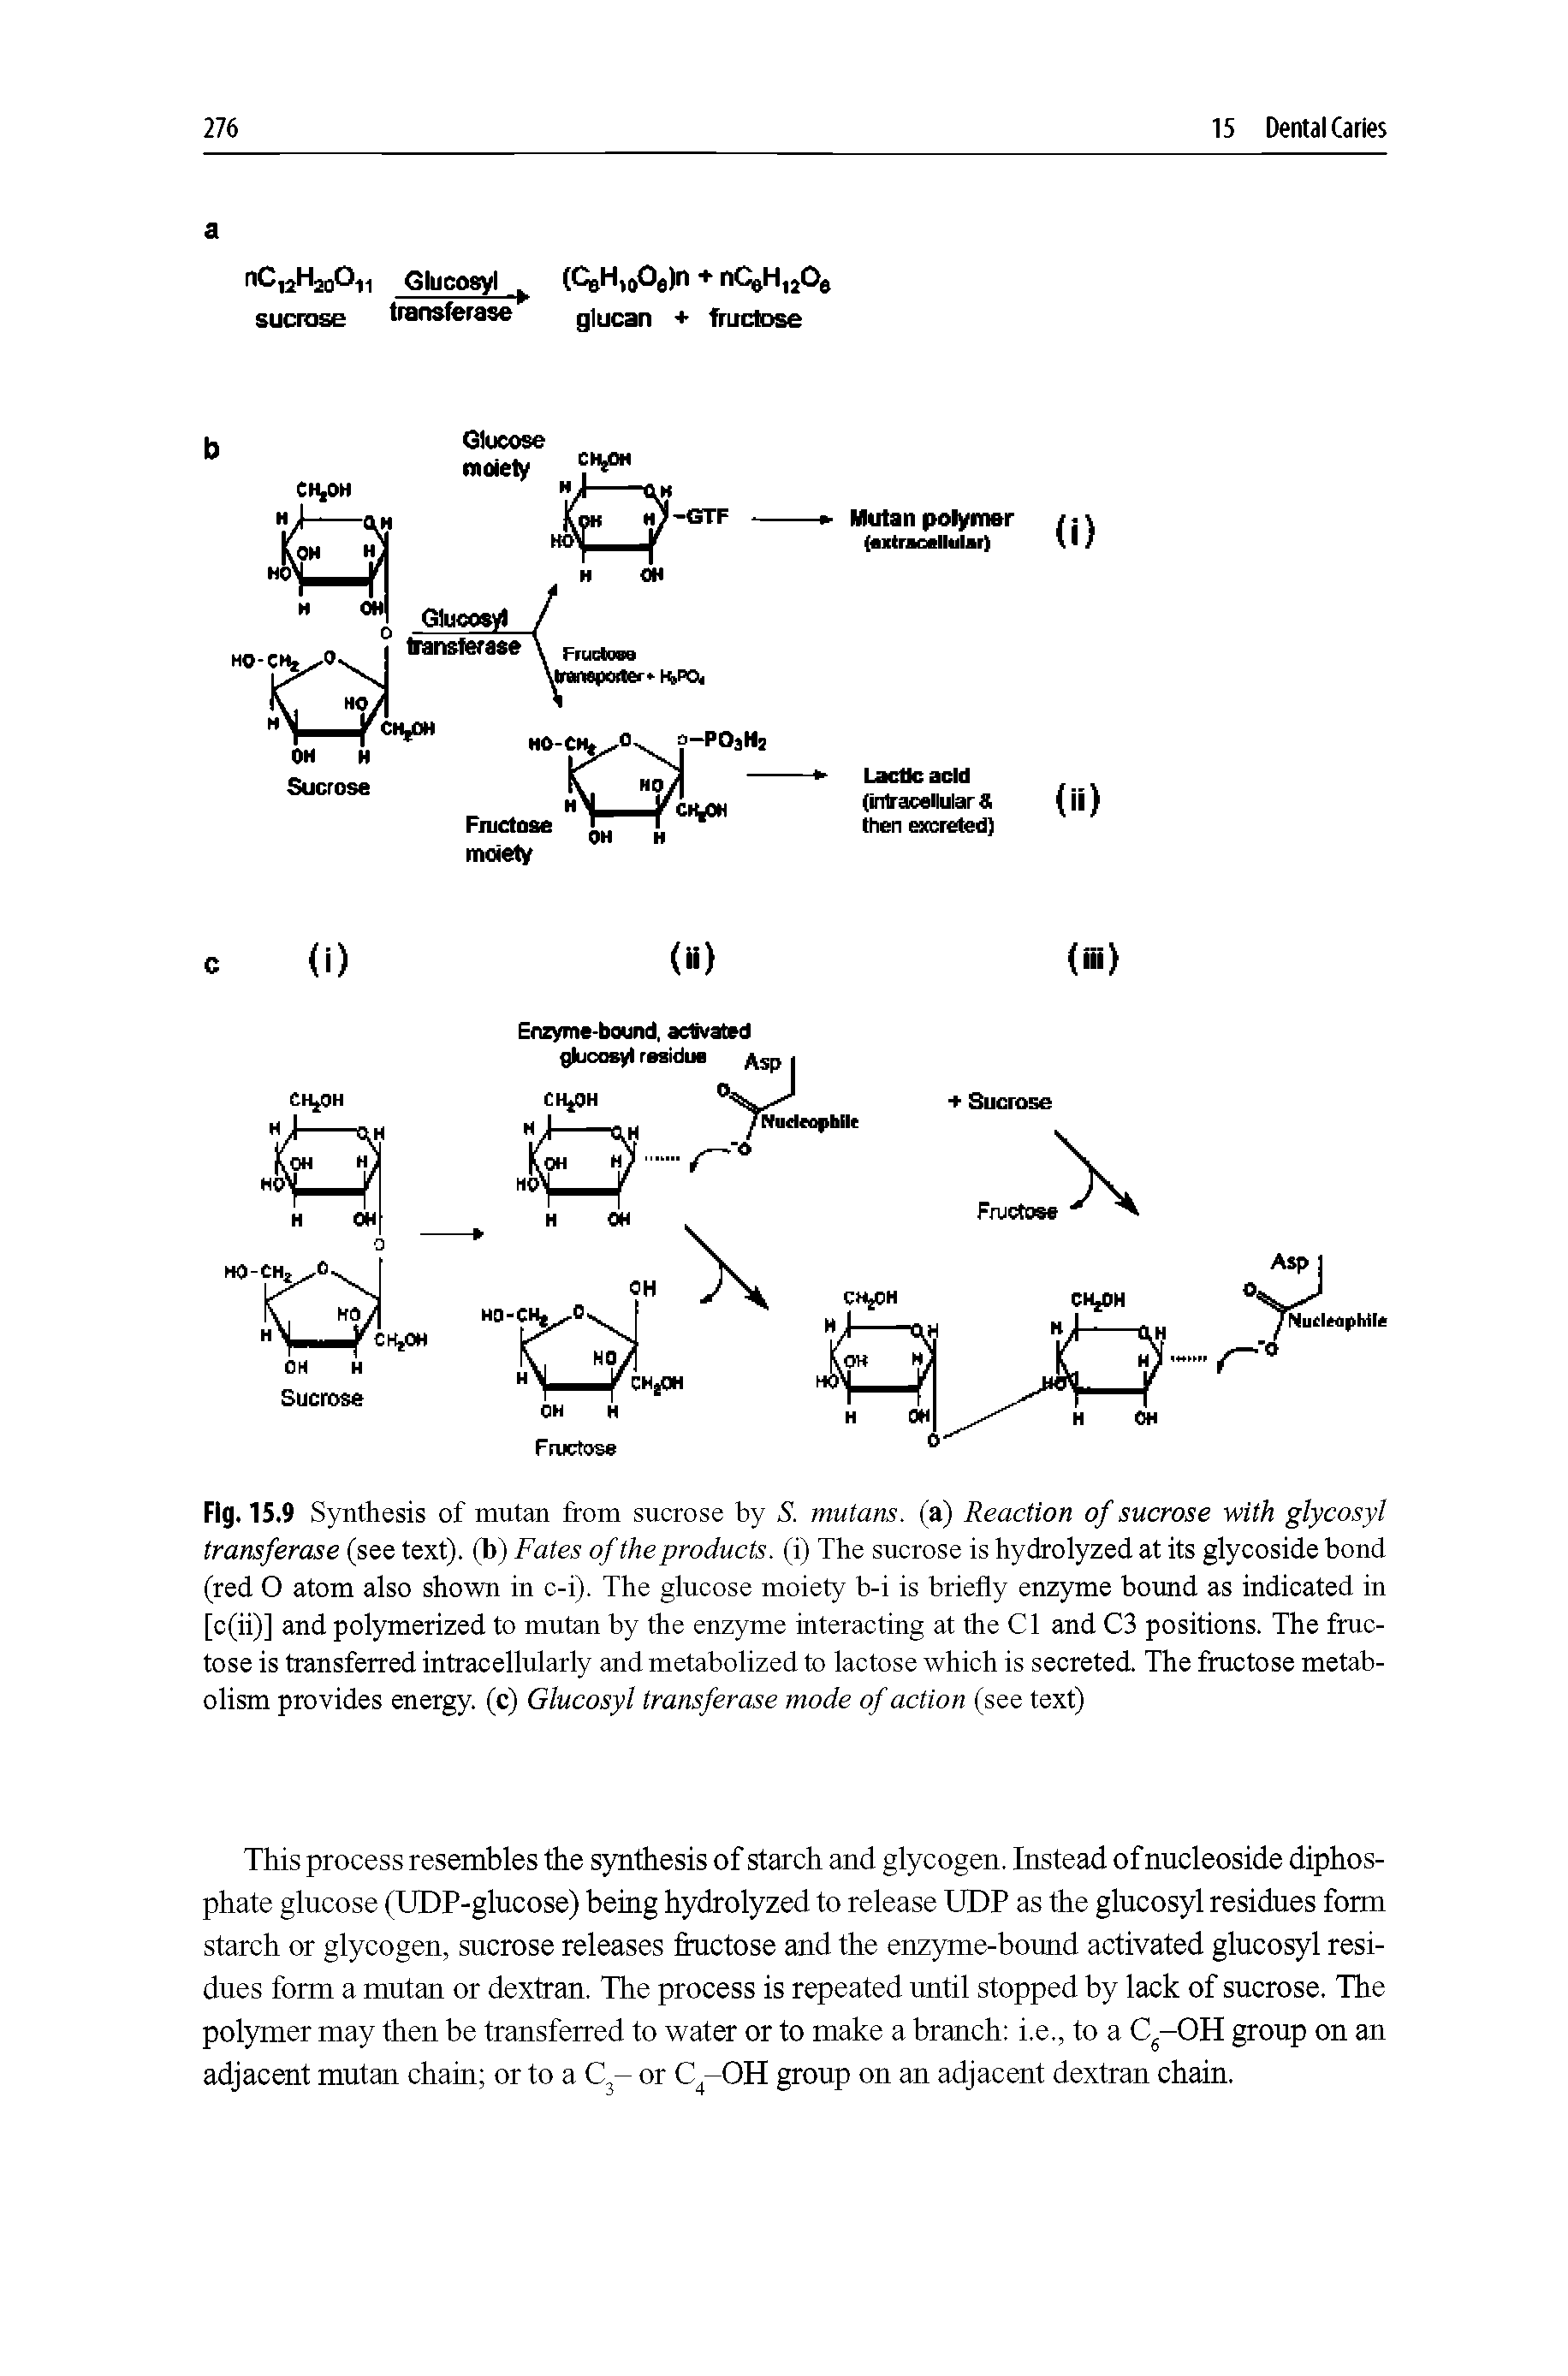 Fig. 15.9 Synthesis of mutan from sucrose by S. mutans. (a) Reaction of sucrose with glycosyl transferase (see text), (b) Fates of the products, (i) The sucrose is hydrolyzed at its glycoside bond (red O atom also shown in c-i). The glucose moiety b-i is briefly enzyme bound as indicated in [c(ii)] and polymerized to mutan by the enzyme interacting at the Cl and C3 positions. The fructose is transferred intracellularly and metabolized to lactose which is secreted. The fructose metabolism provides energy, (c) Glucosyl transferase mode of action (see text)...